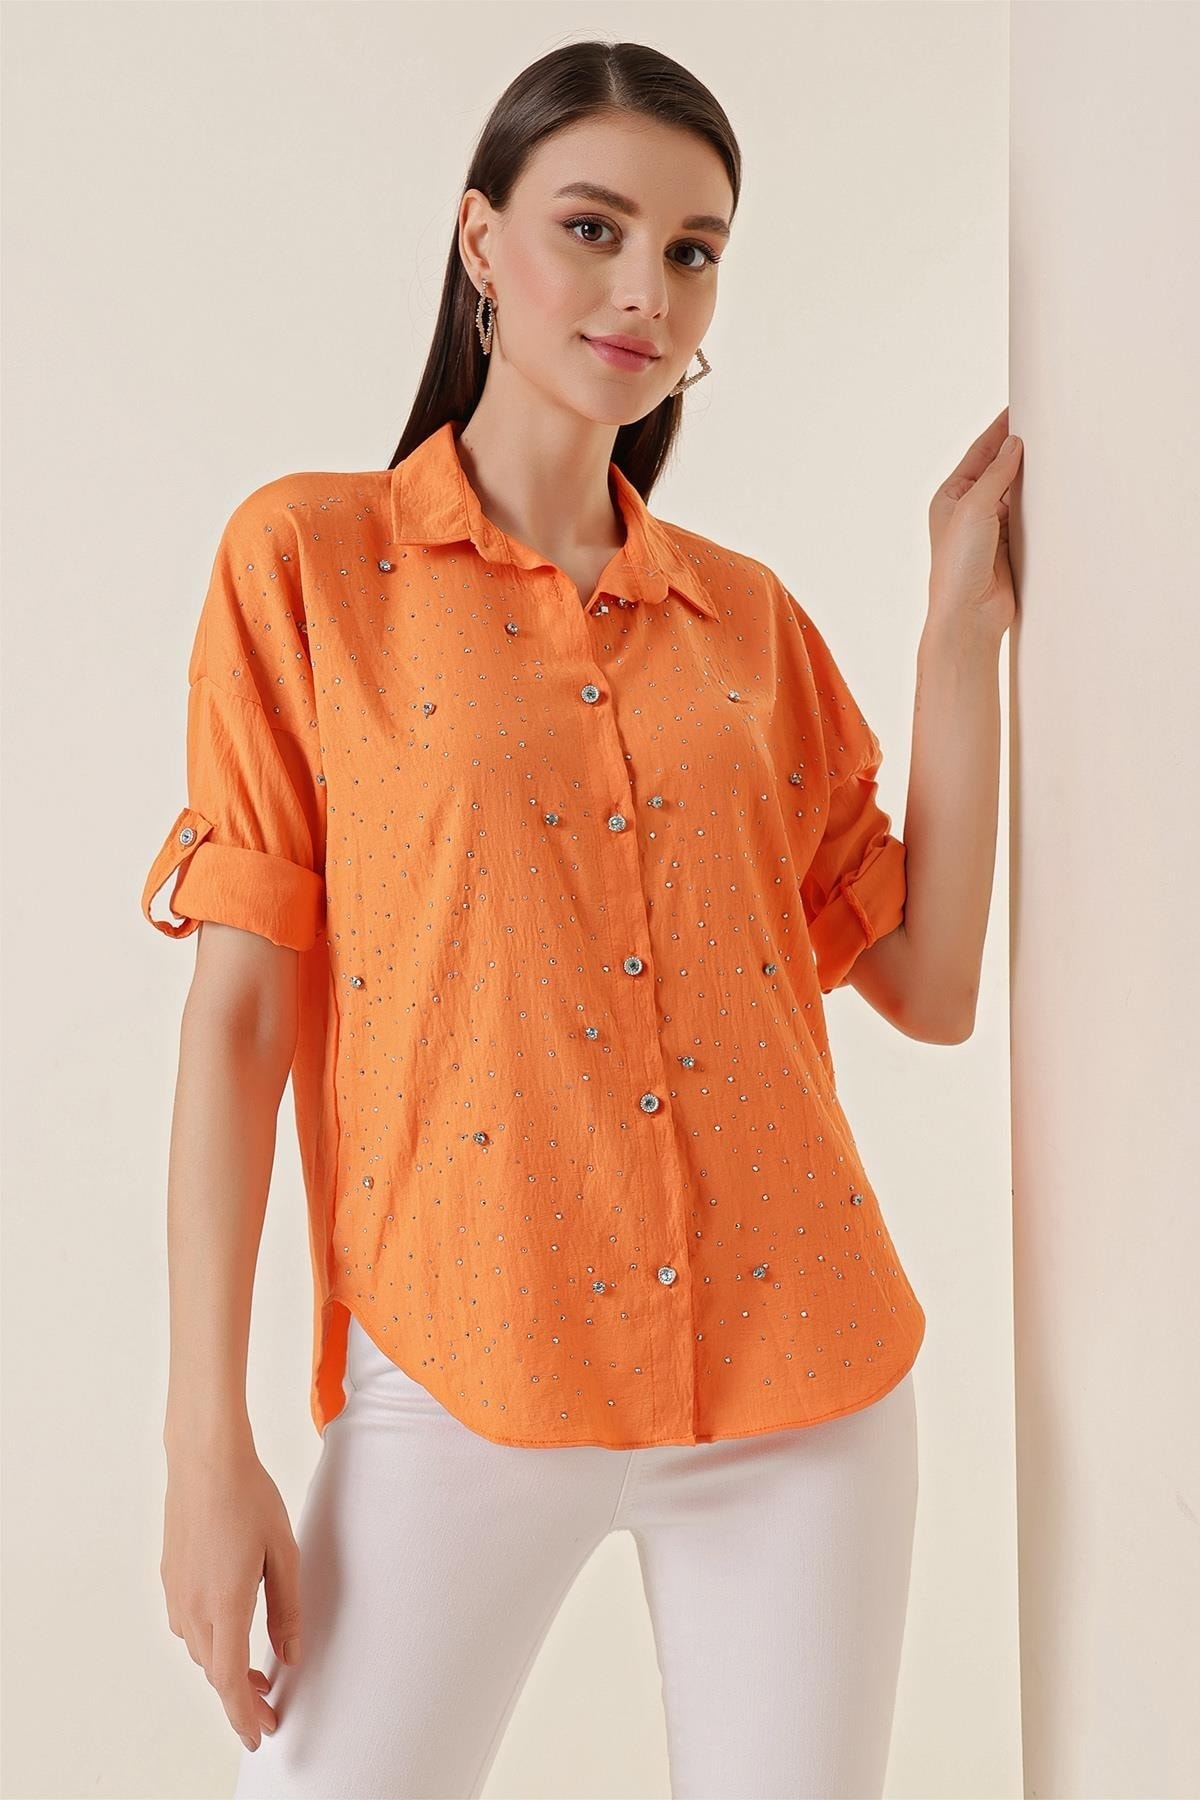 By Saygı Studded And Stone Buttoned Polo Neck Shirt Orange